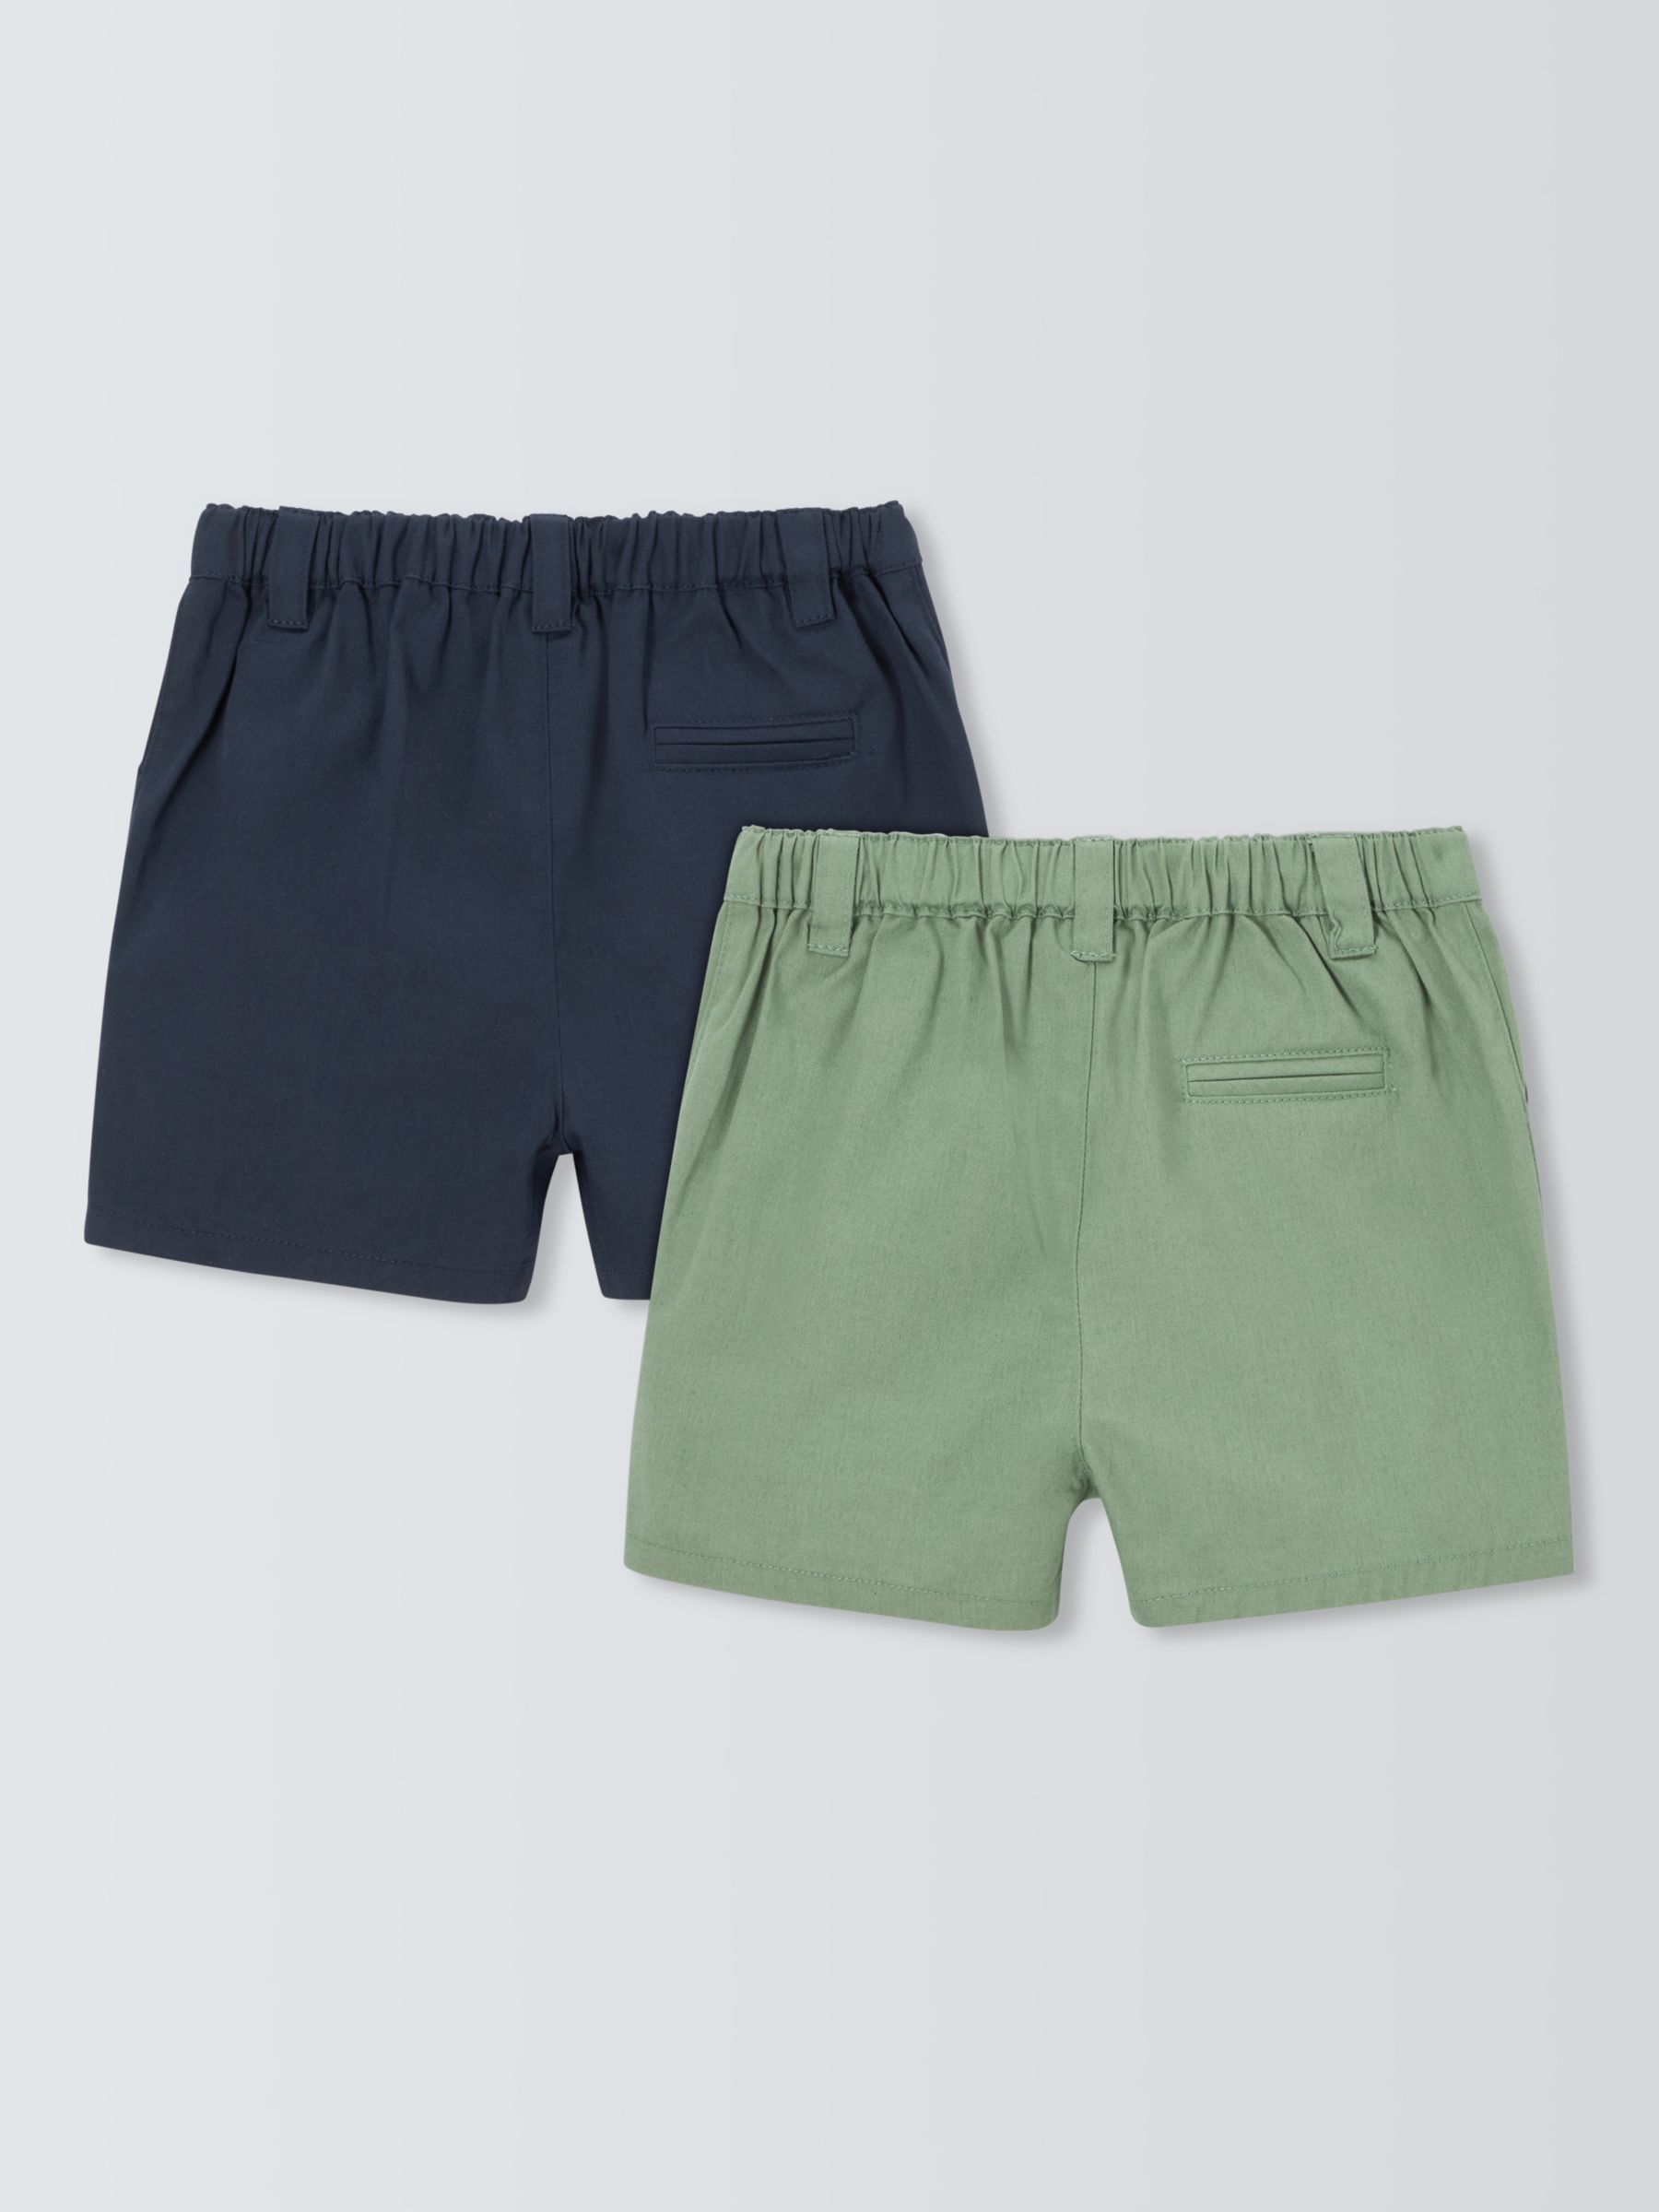 John Lewis Heirloom Collection Baby Chino Shorts, Pack of 2, Green/Navy, 6-9 months